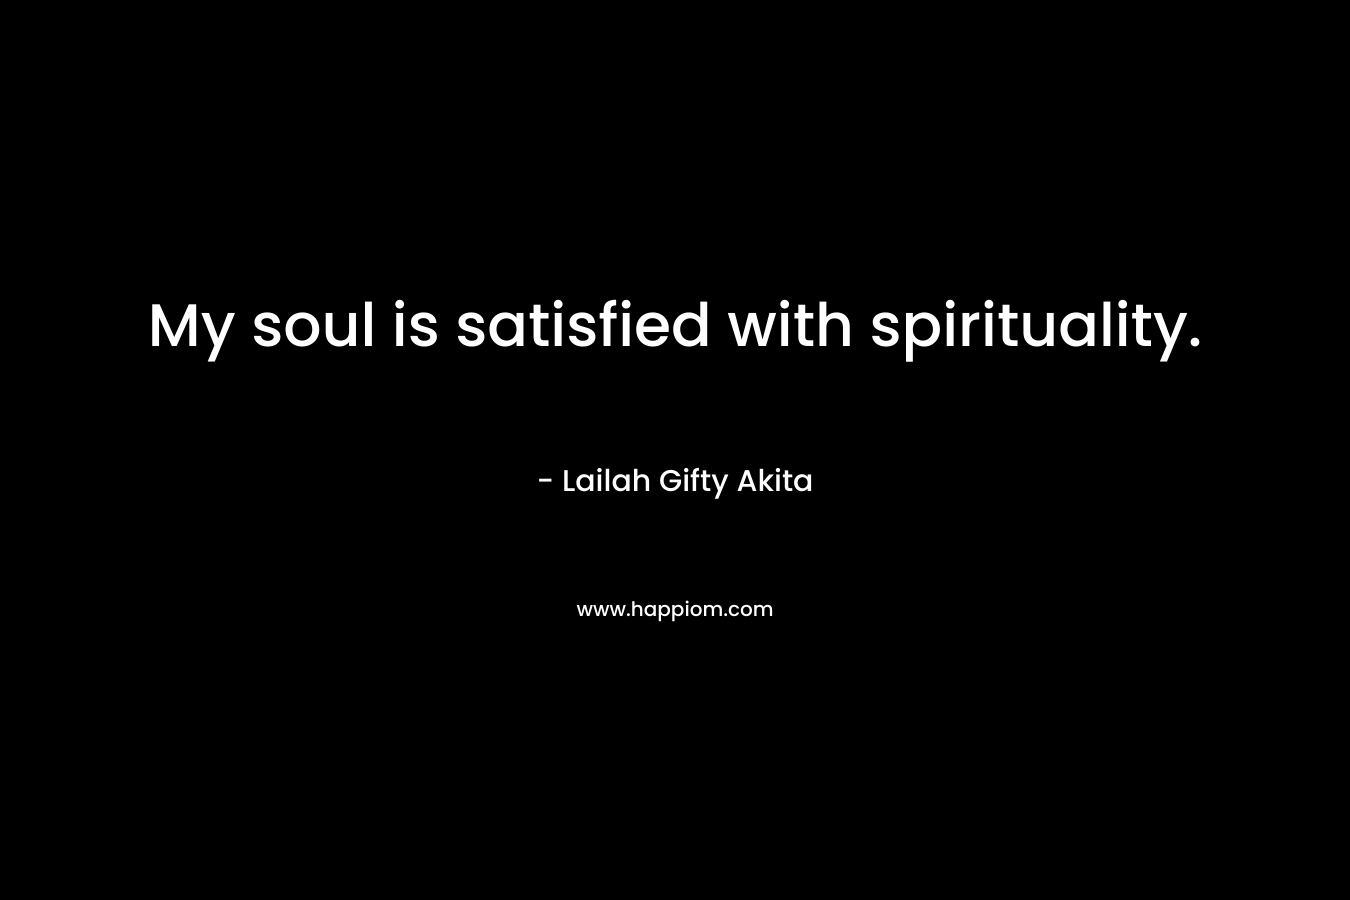 My soul is satisfied with spirituality.